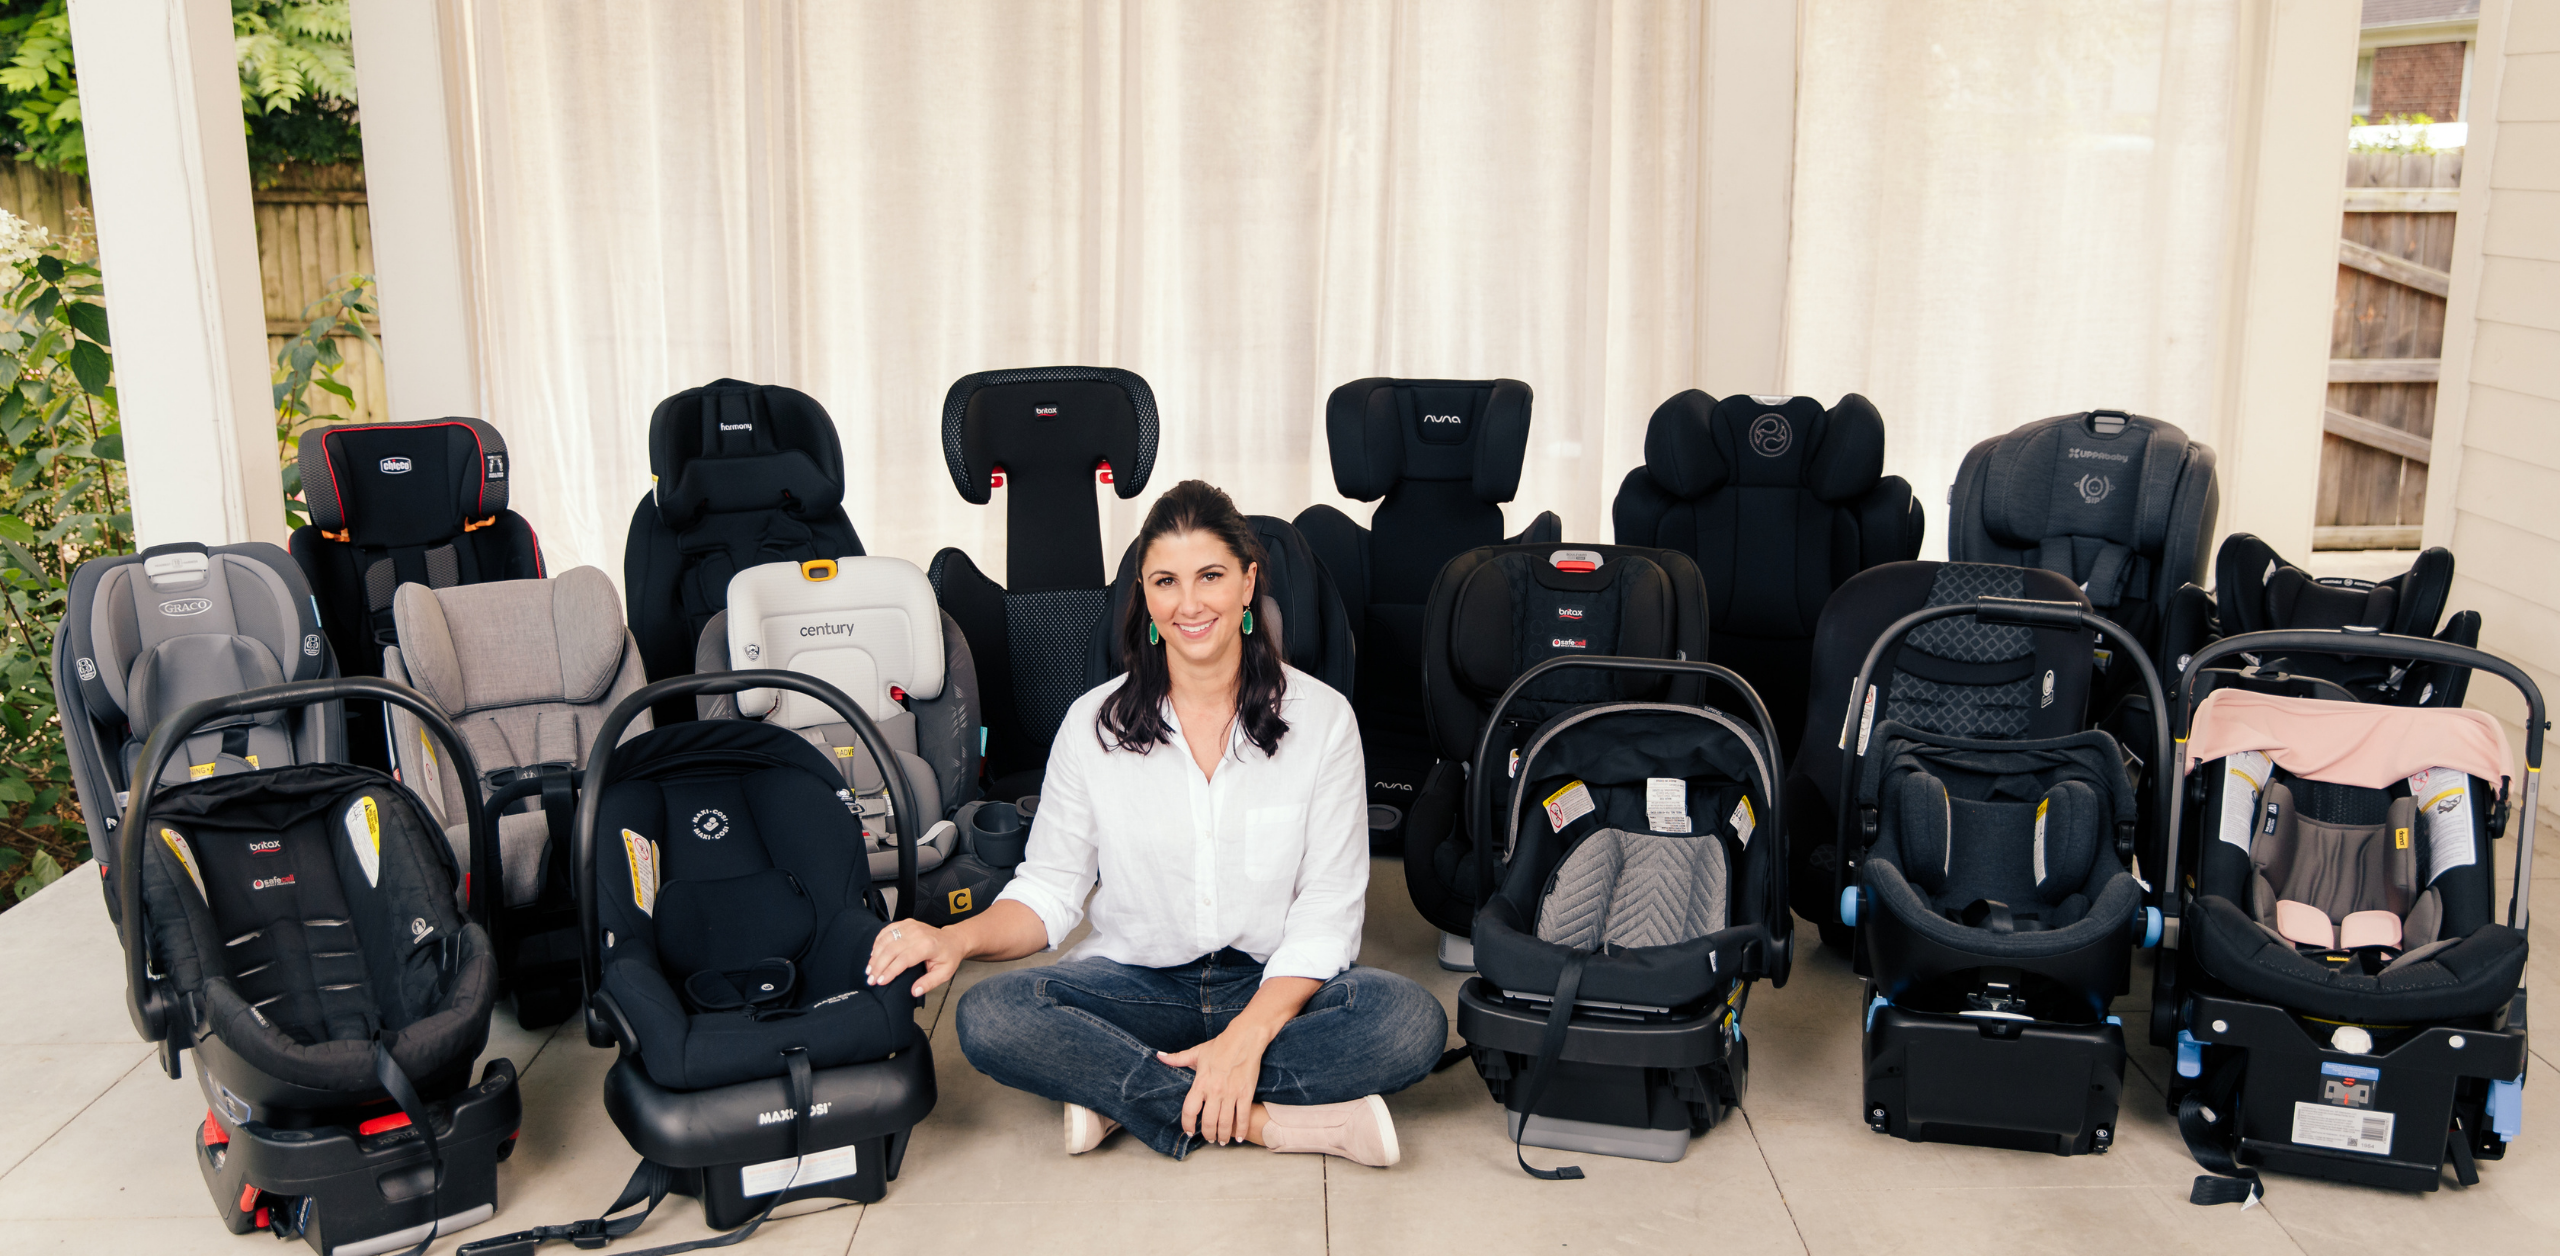 5 Different Types of Child Car Seats